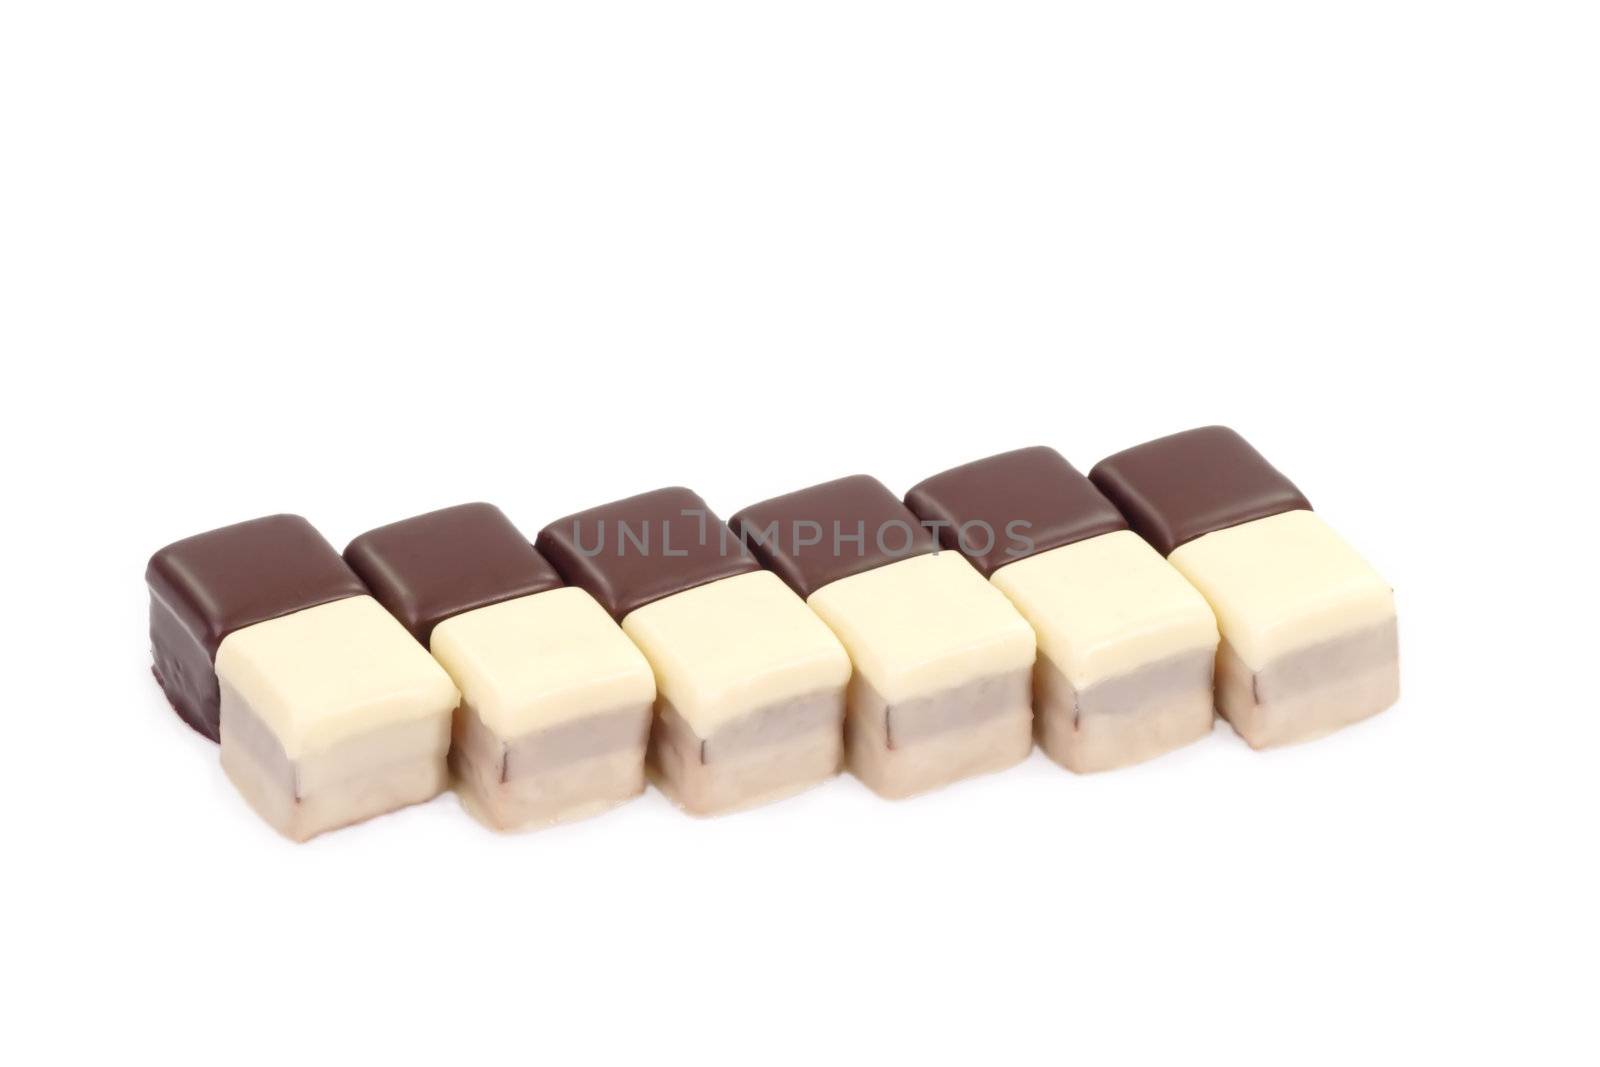 Black and white chocolate confection on bright background